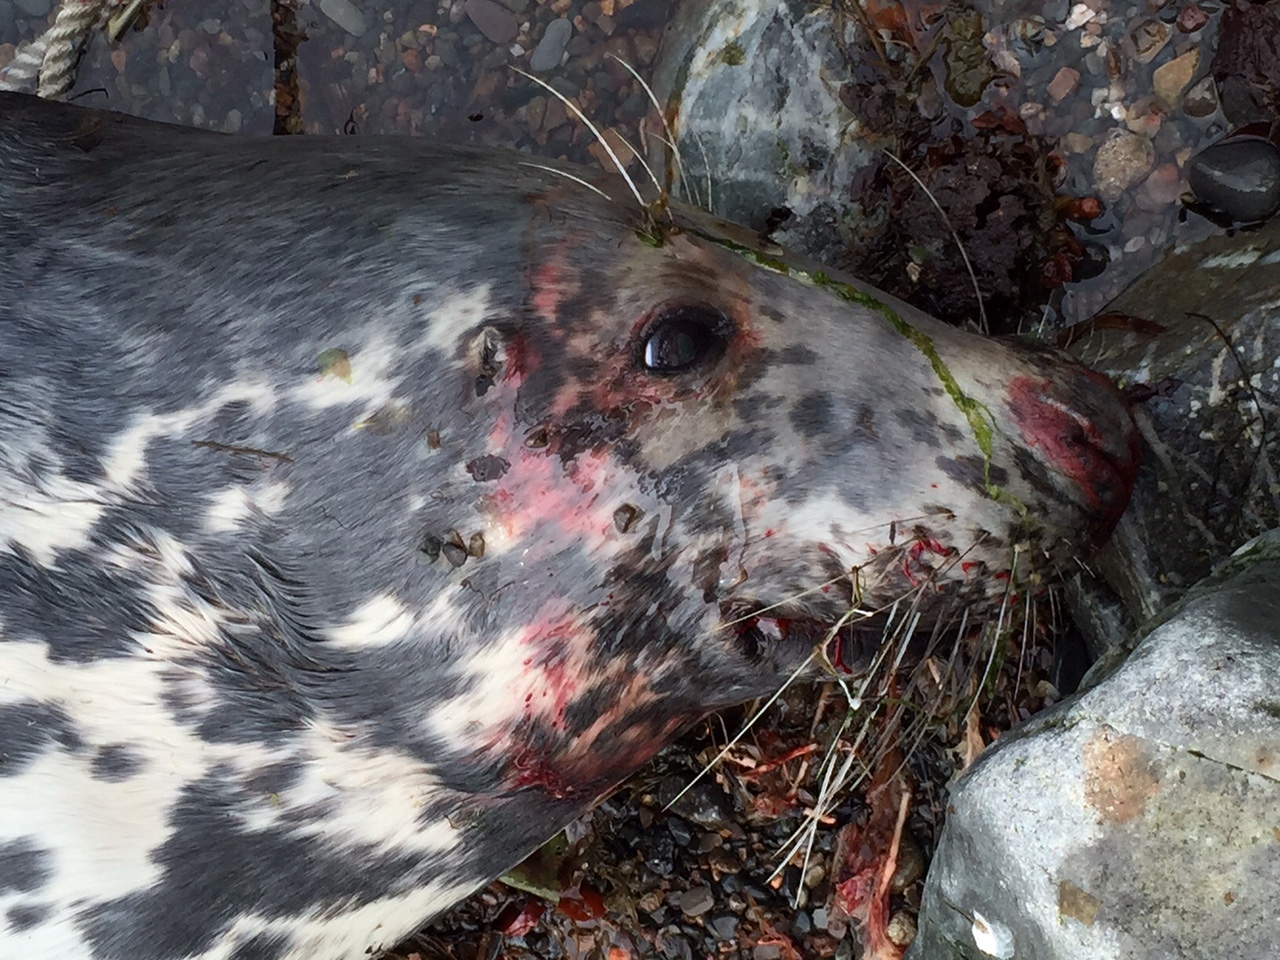 The dead seal was discovered at Crovie